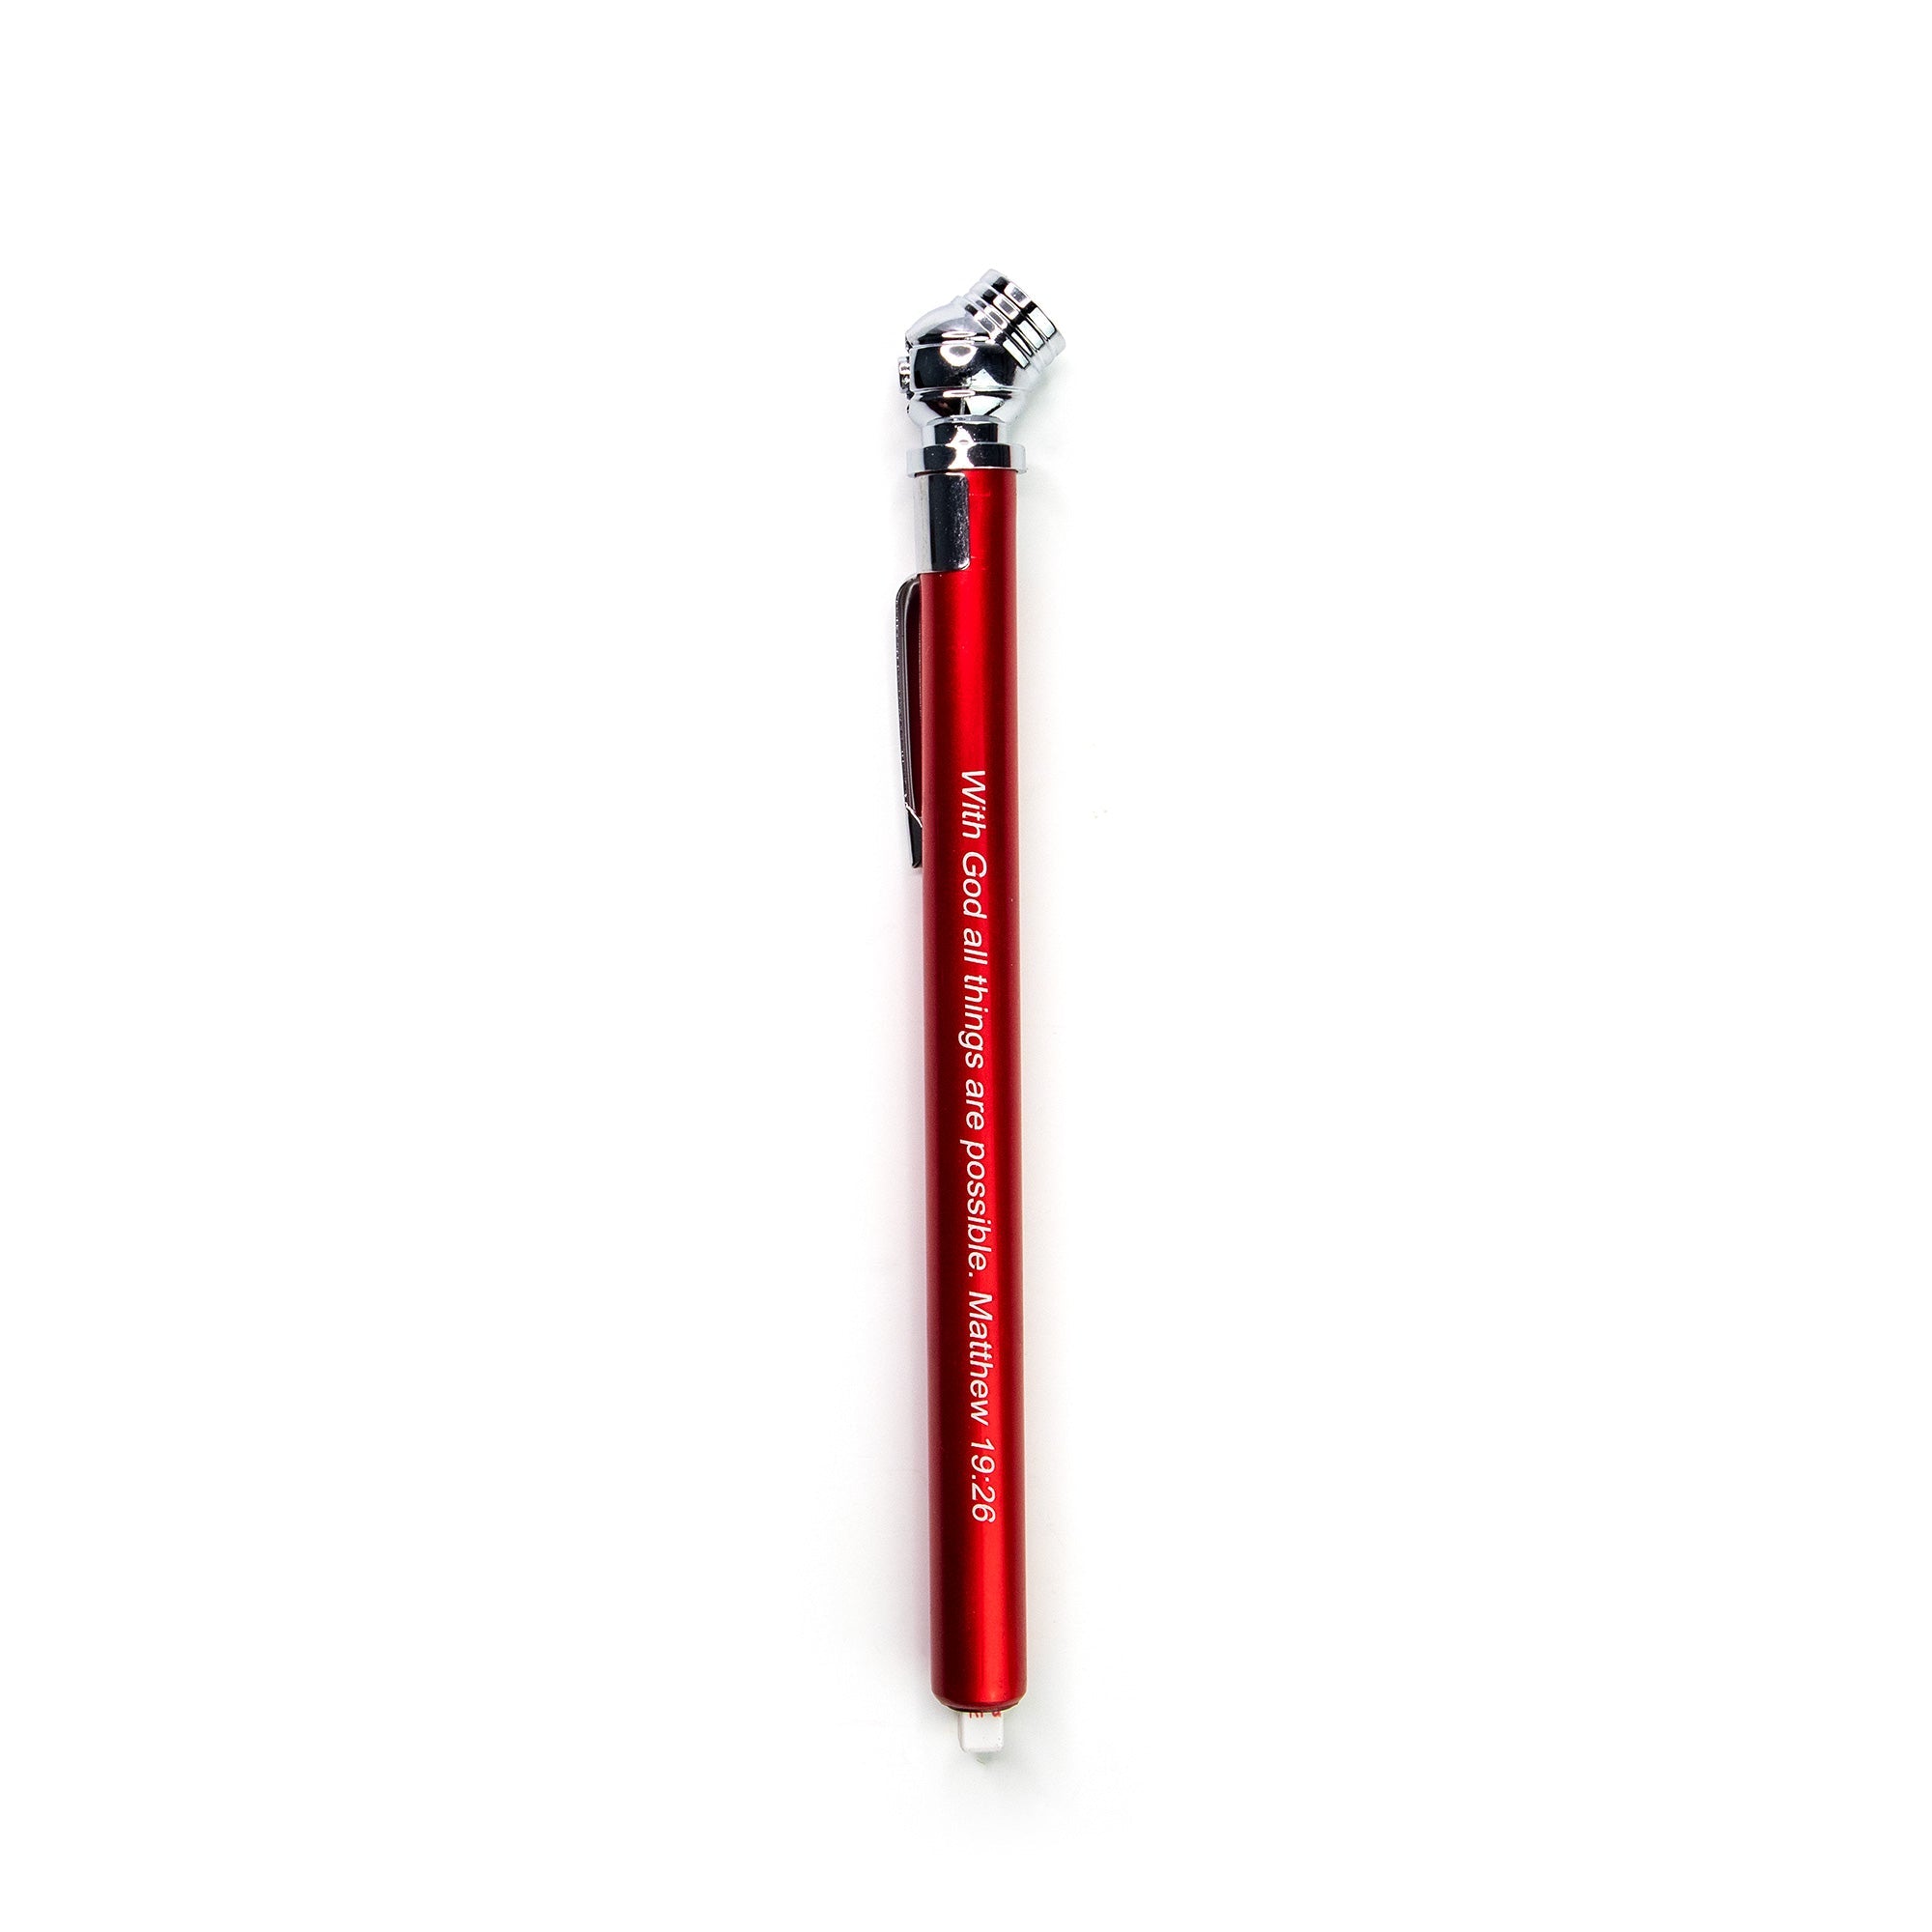 With God All Things are Possible Tire Pressure Gauge with Bookmark - Red